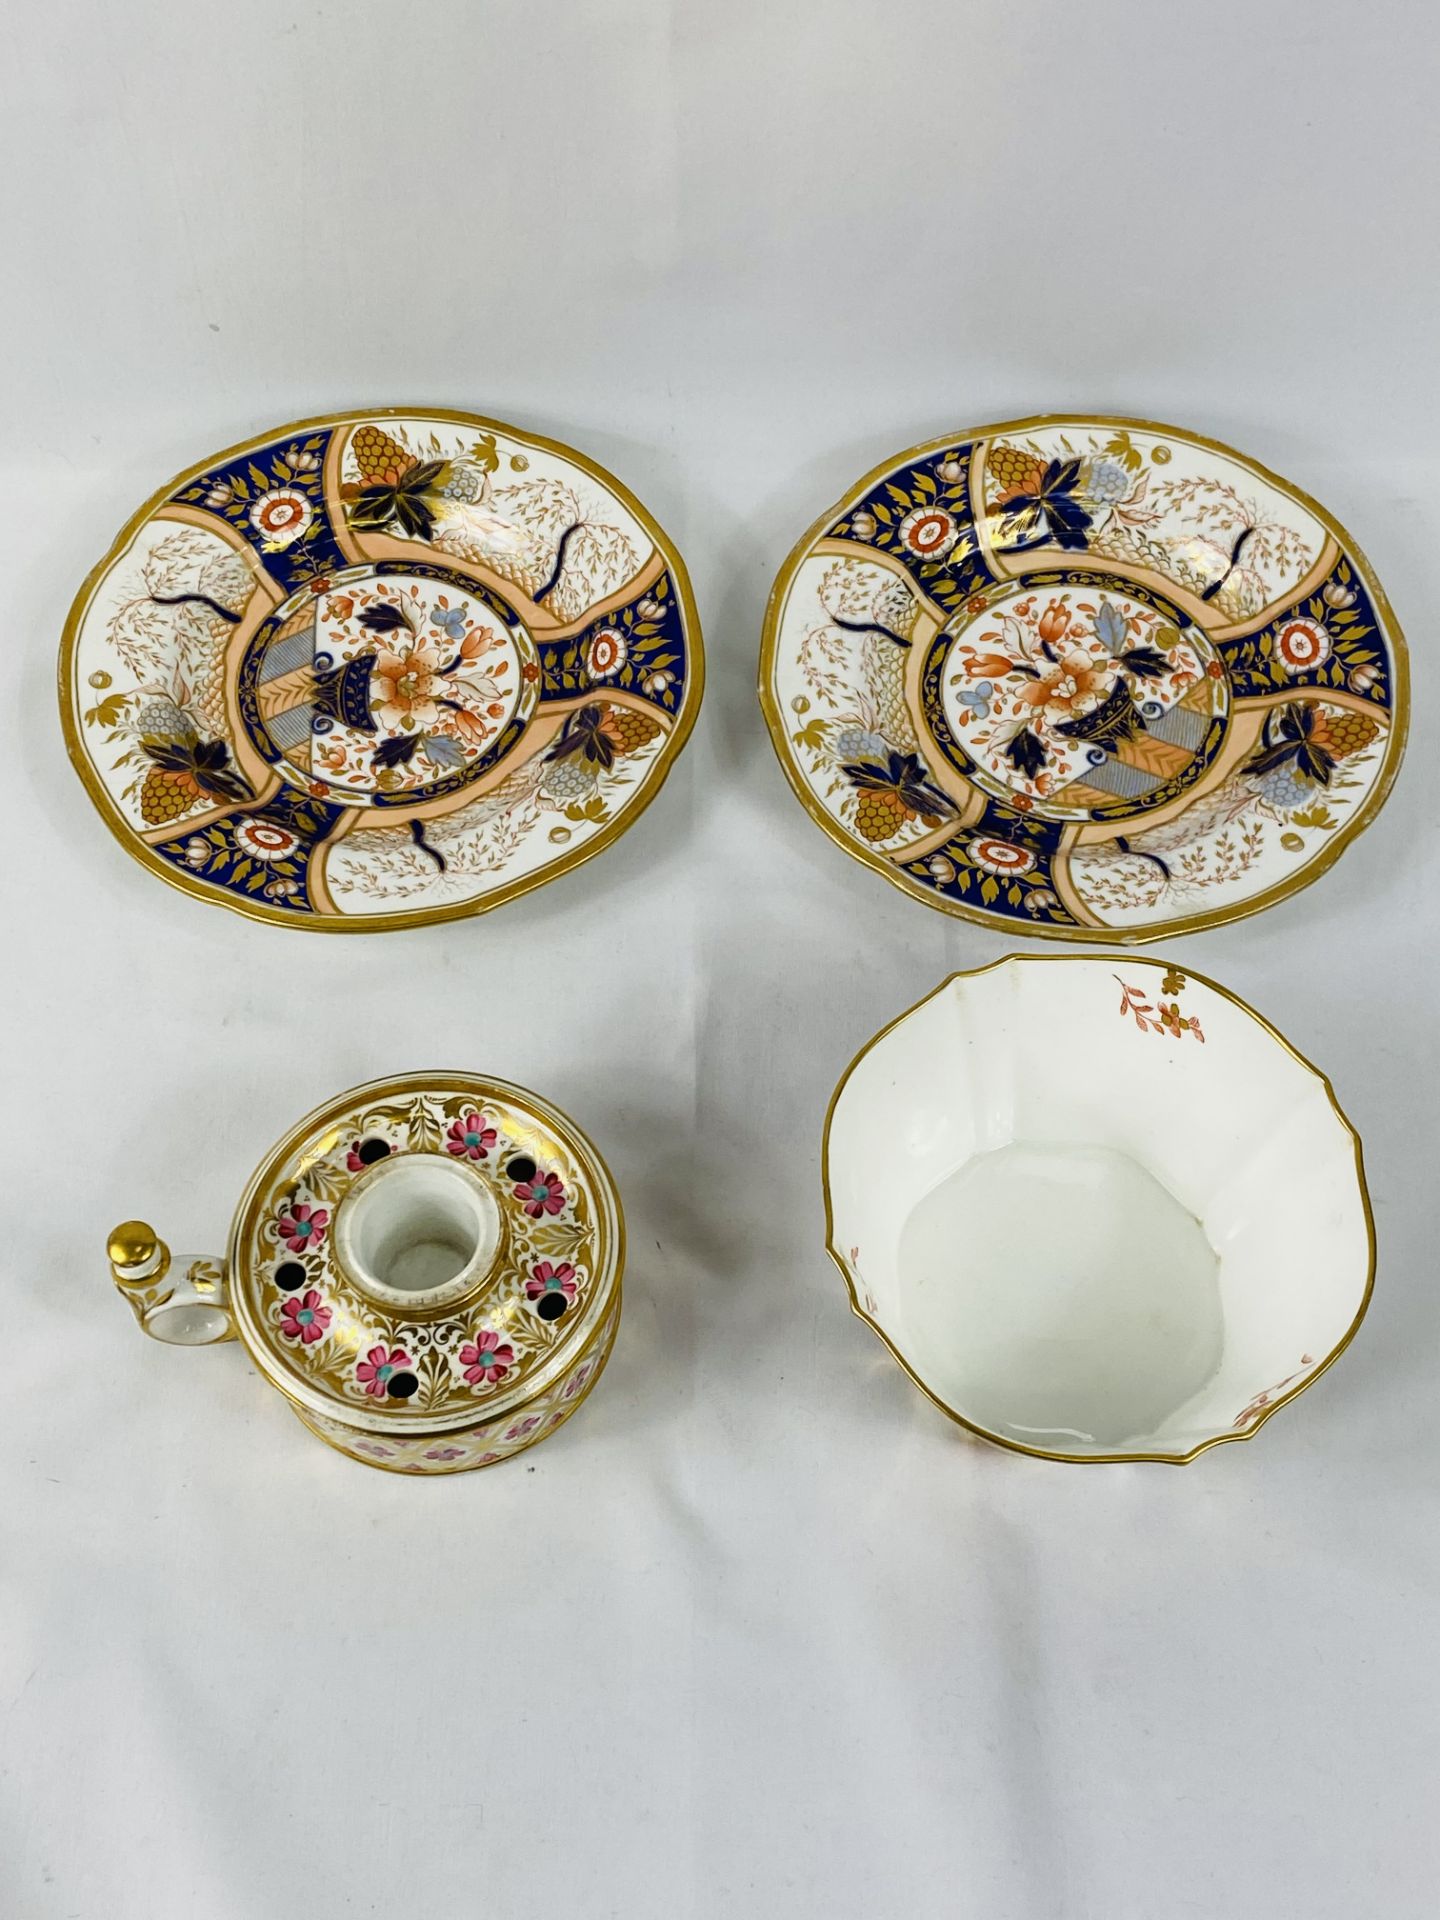 Crown Derby inkwell, two cabinet plates and bowls - Image 7 of 7